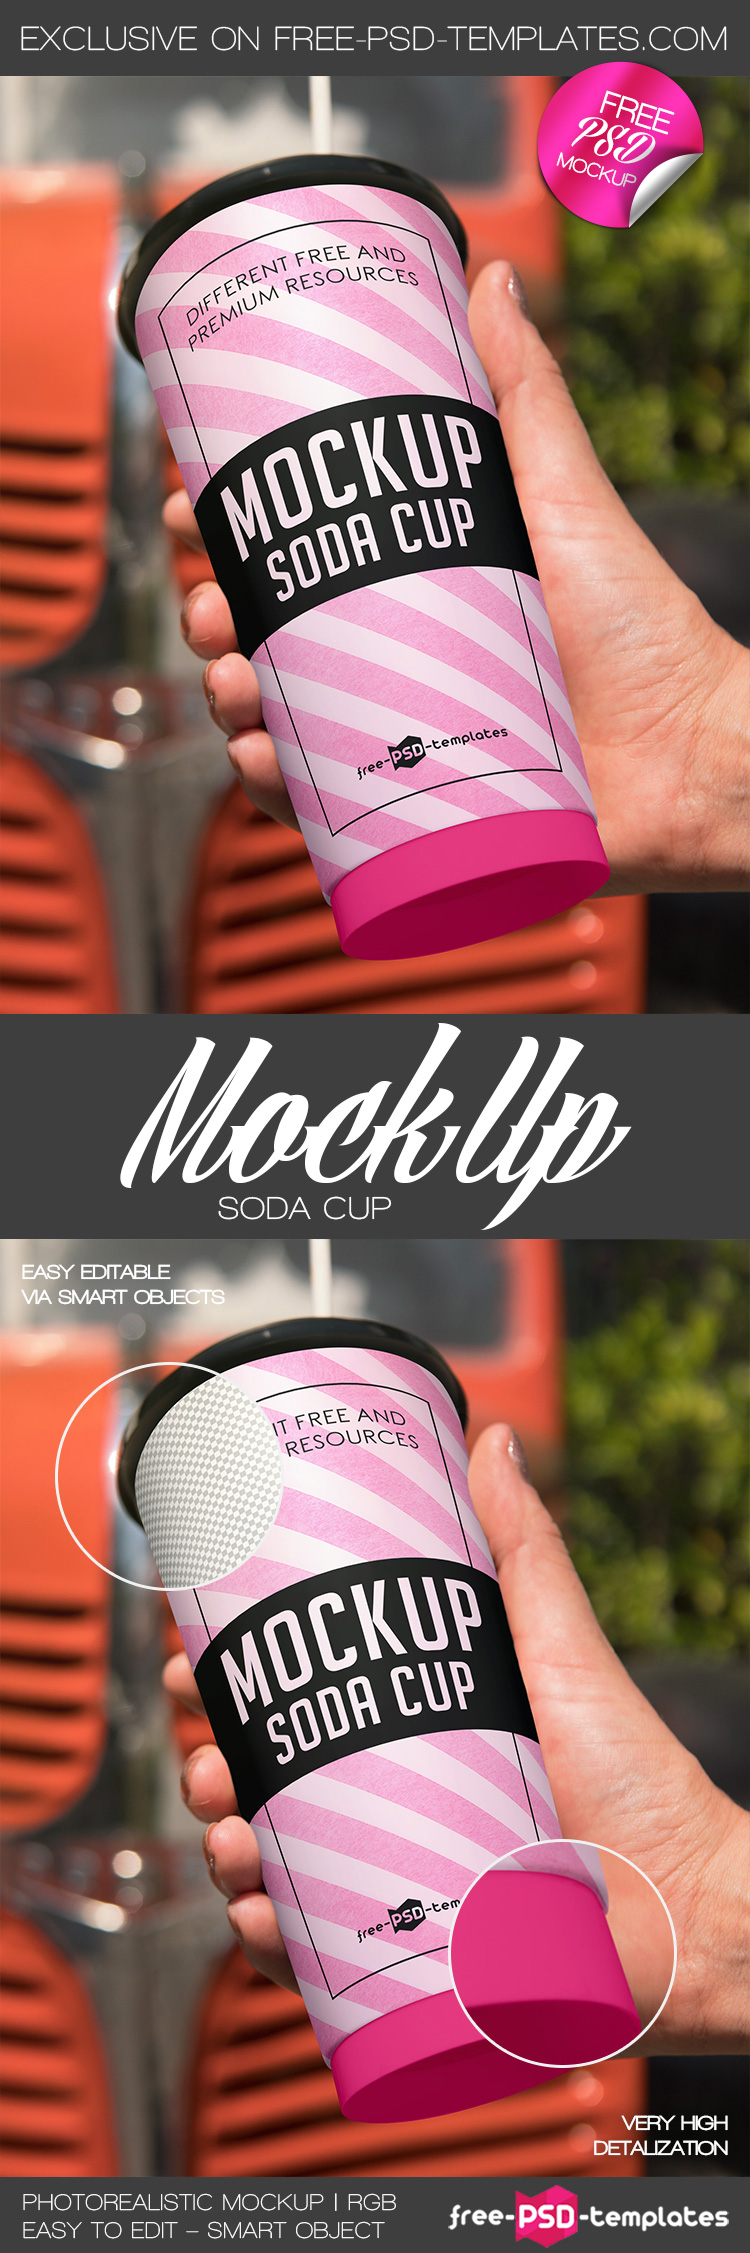 free-soda-cup-mock-up-in-psd